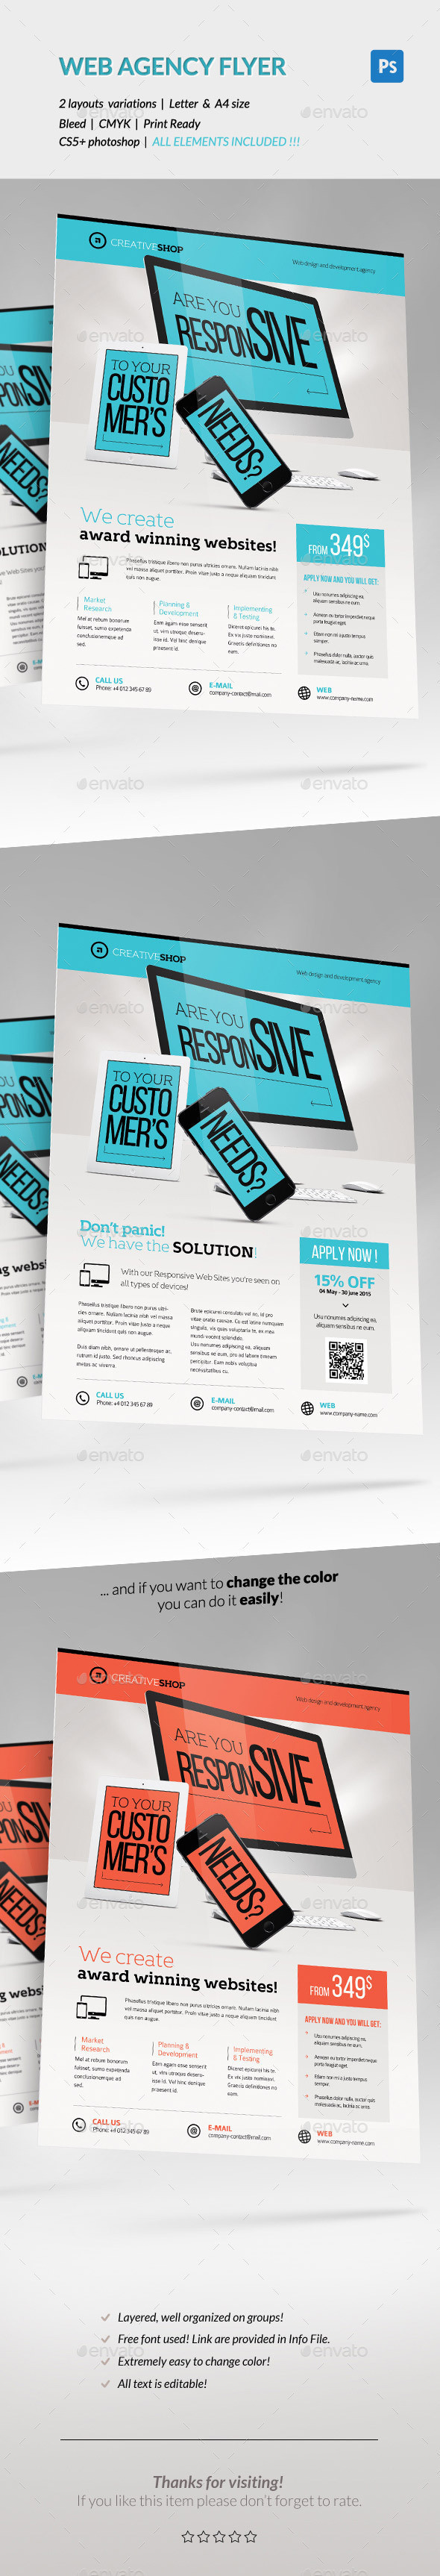 Web agency flyer preview